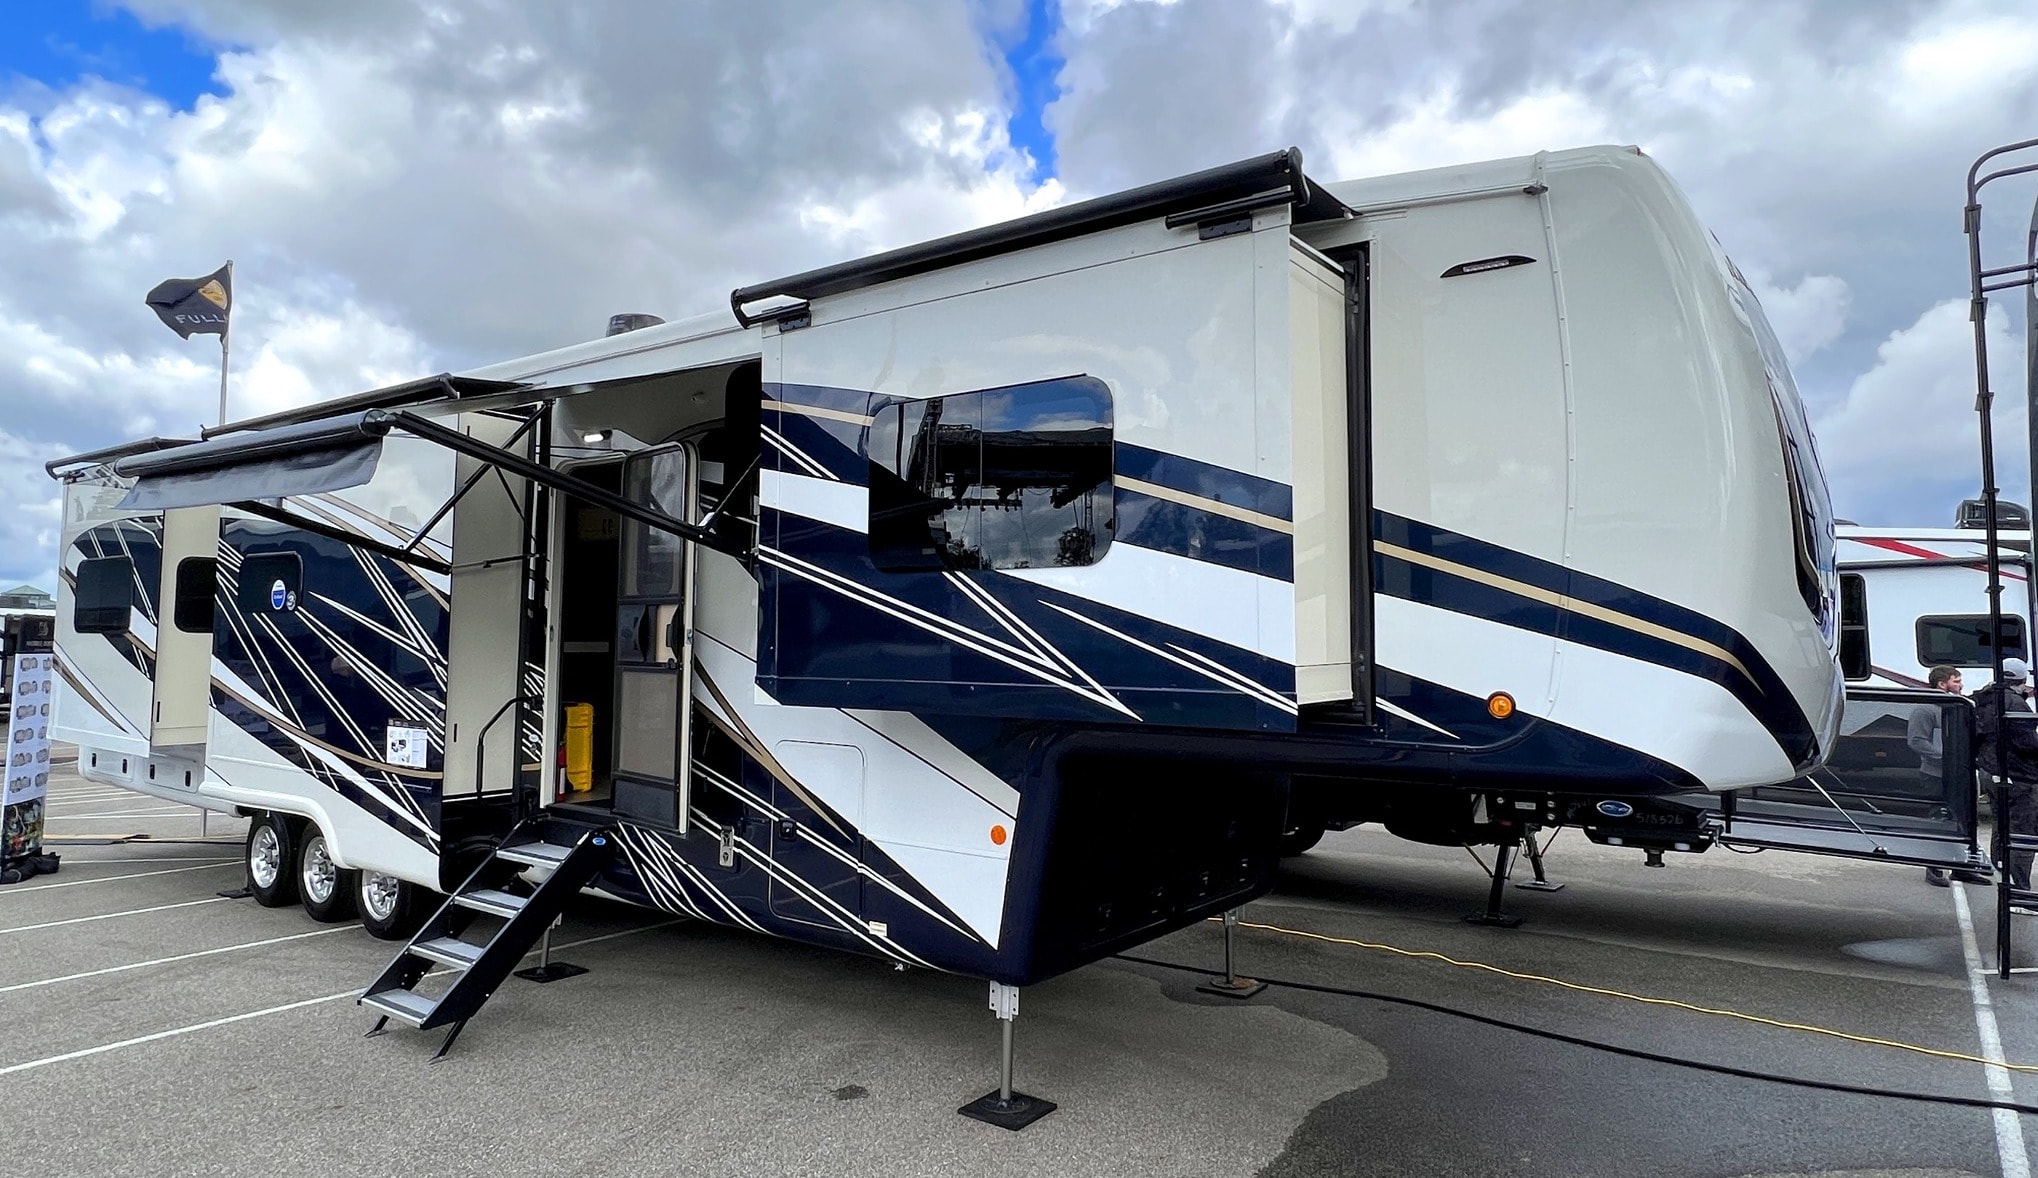 DRV's 2023 Orlando Is a "Mobile Suite" Built for the Finest Living Shows Off a Flex Room